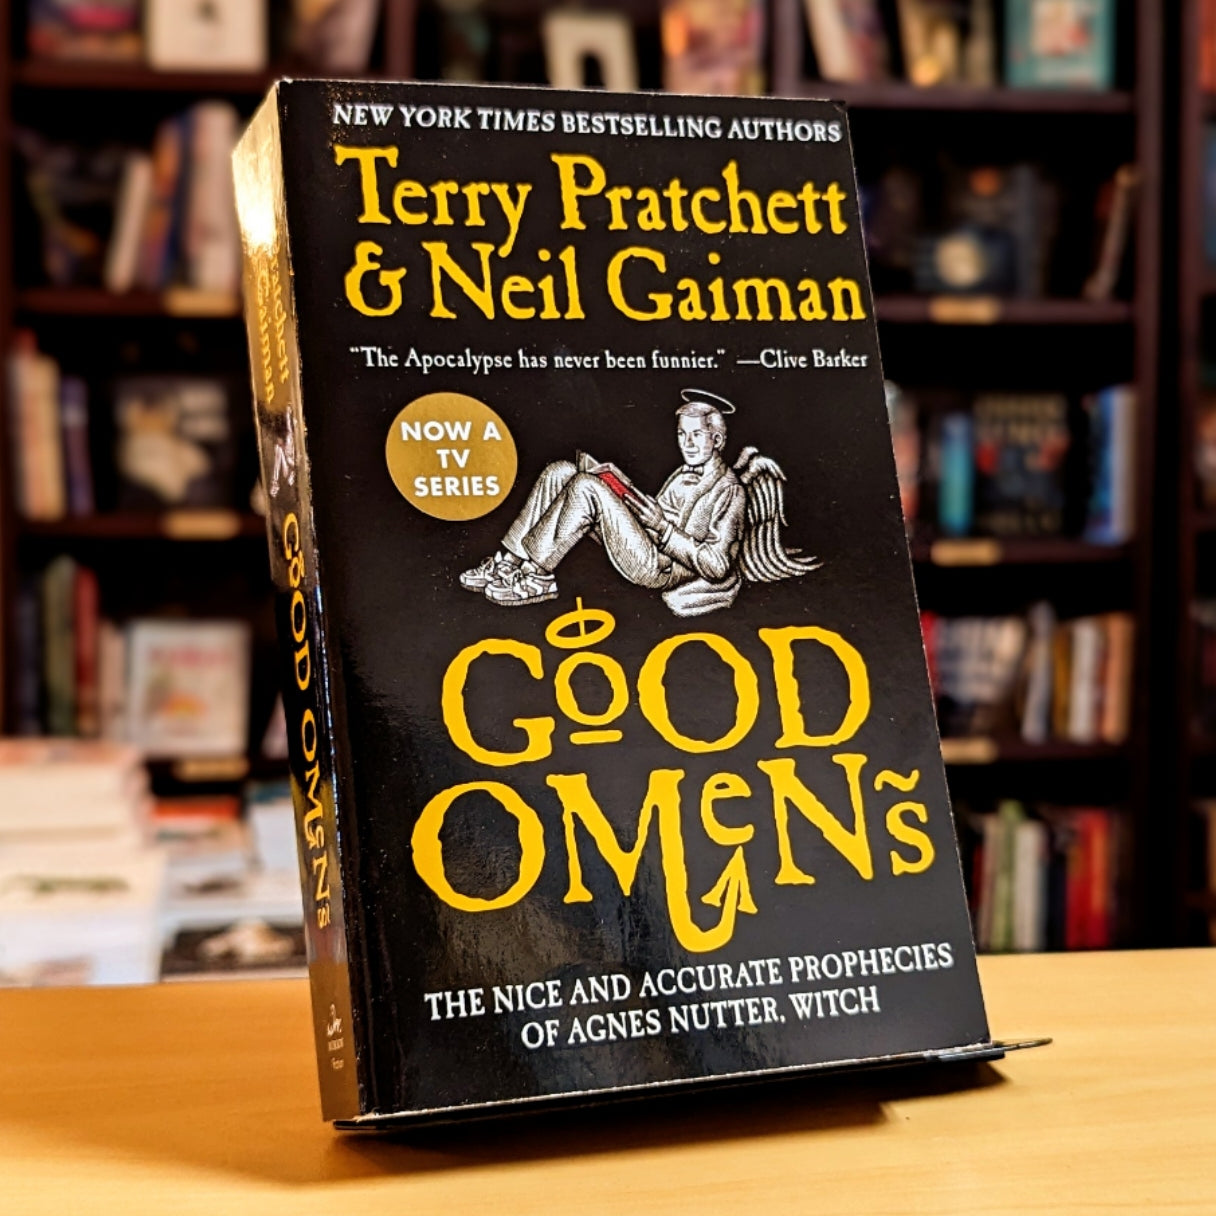 Good Omens: The Nice and Accurate Prophecies of Agnes Nutter, Witch (Cover may vary)